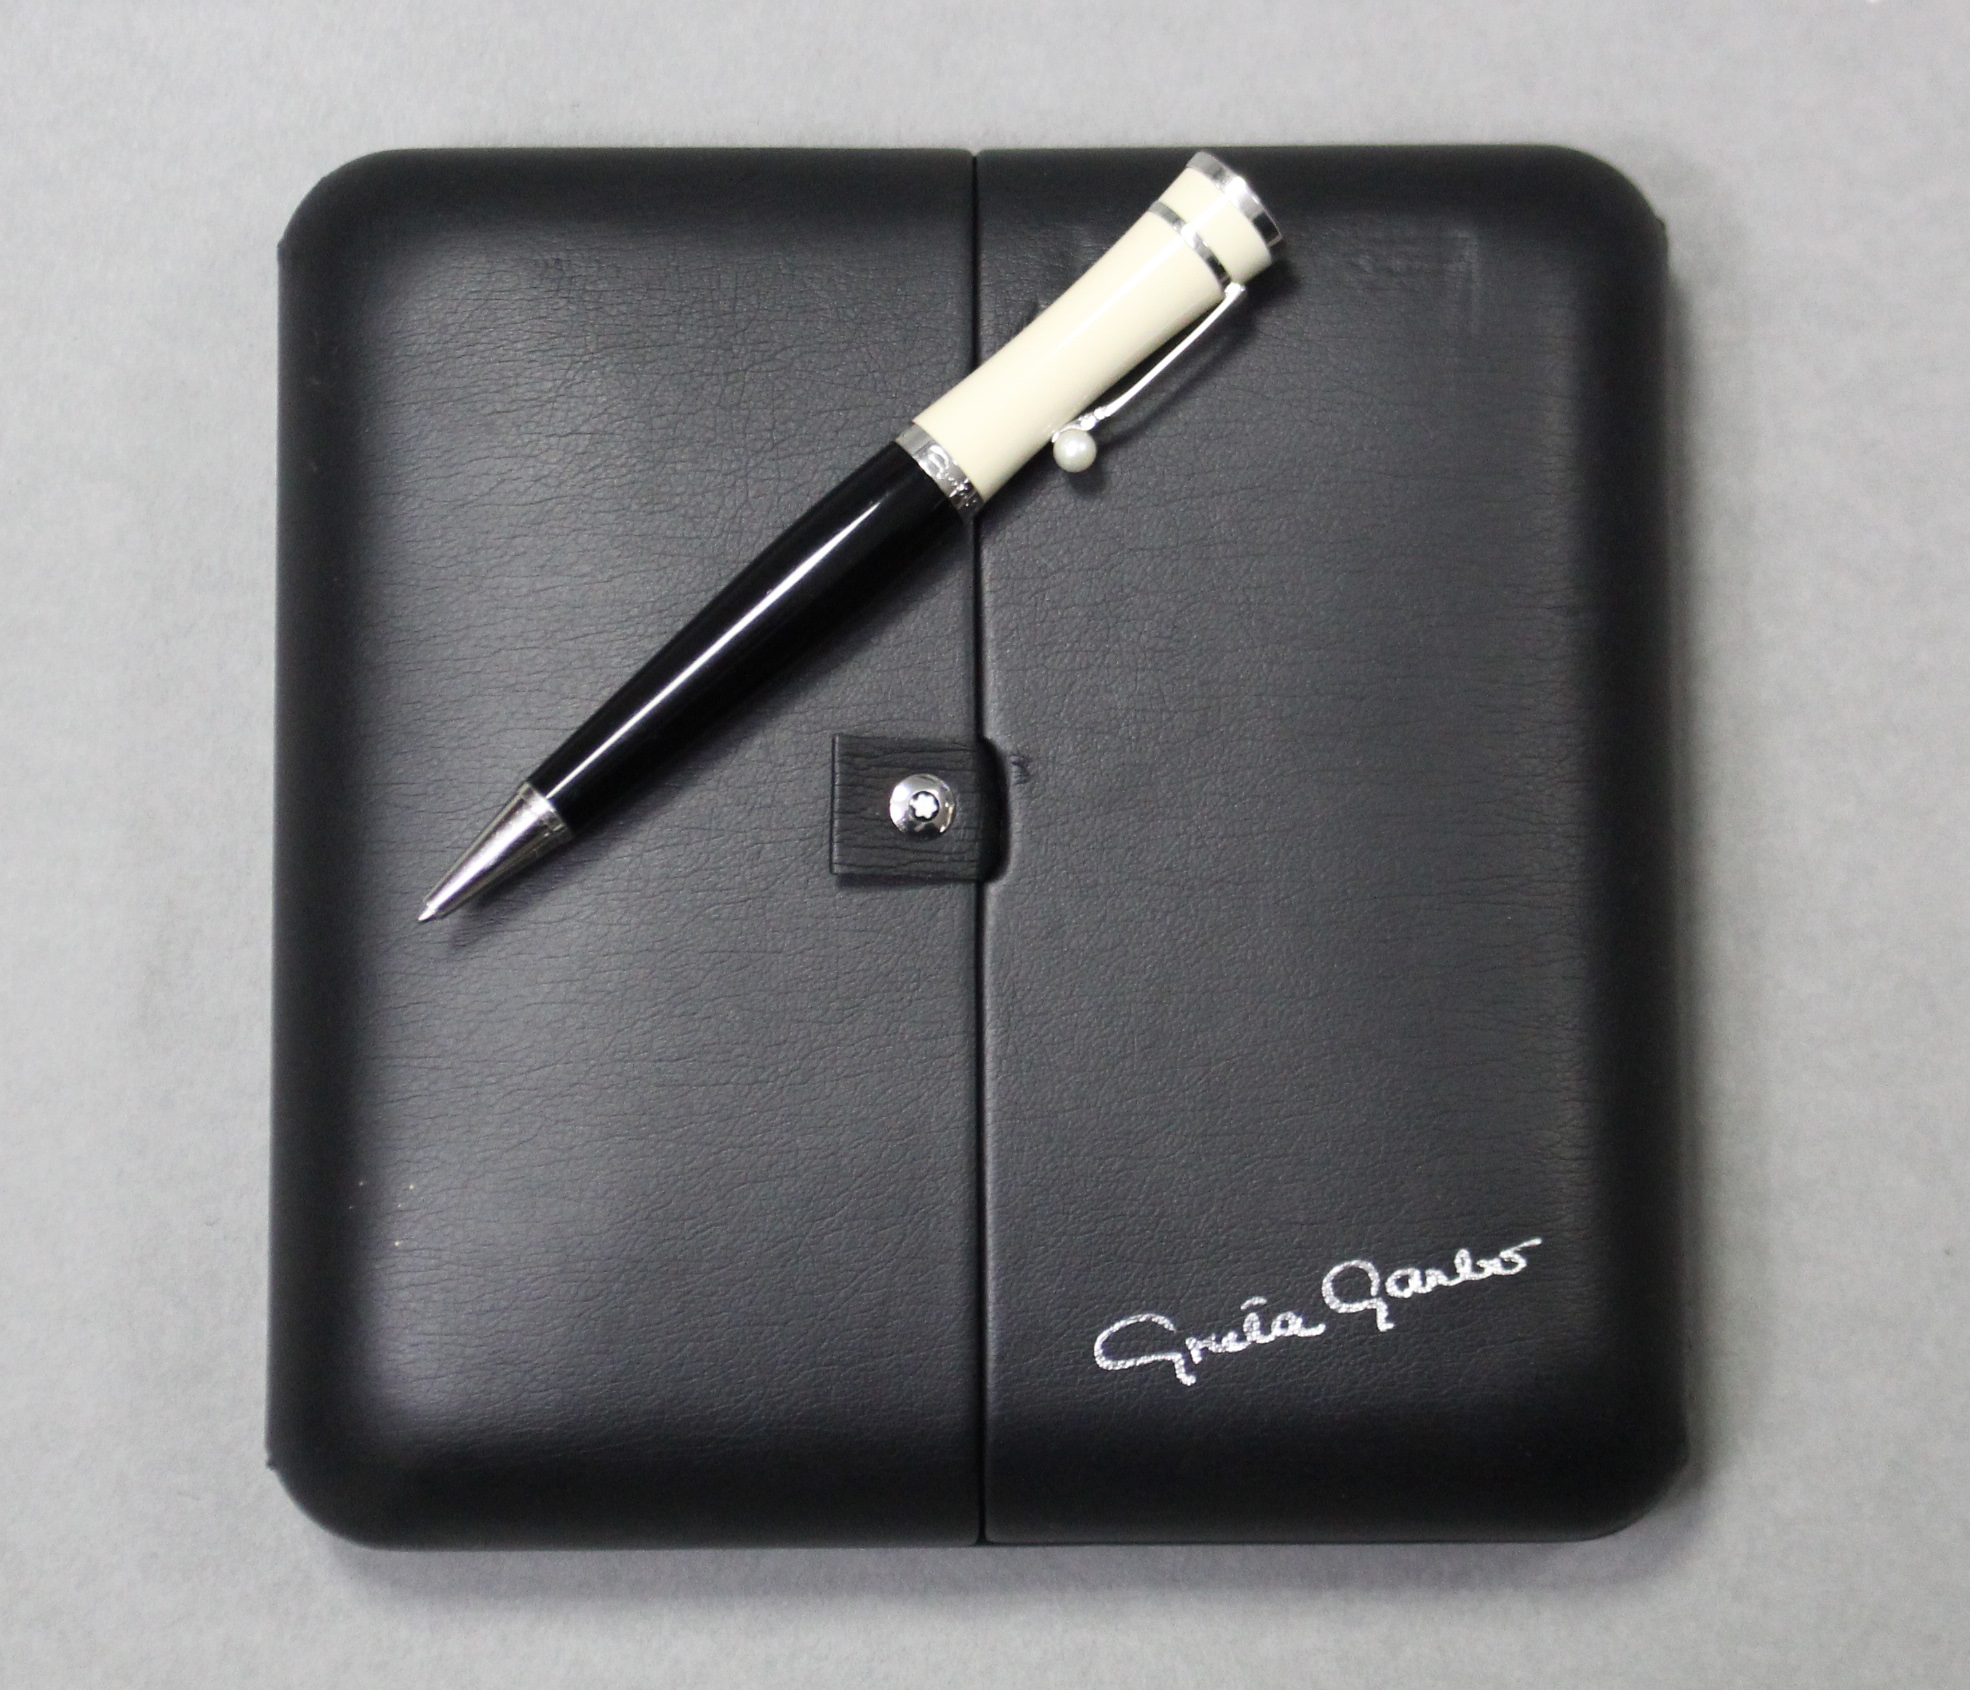 A MONT BLANC SPECIAL EDITION "GRETA GARBO" BALL-POINT PEN, CASED.